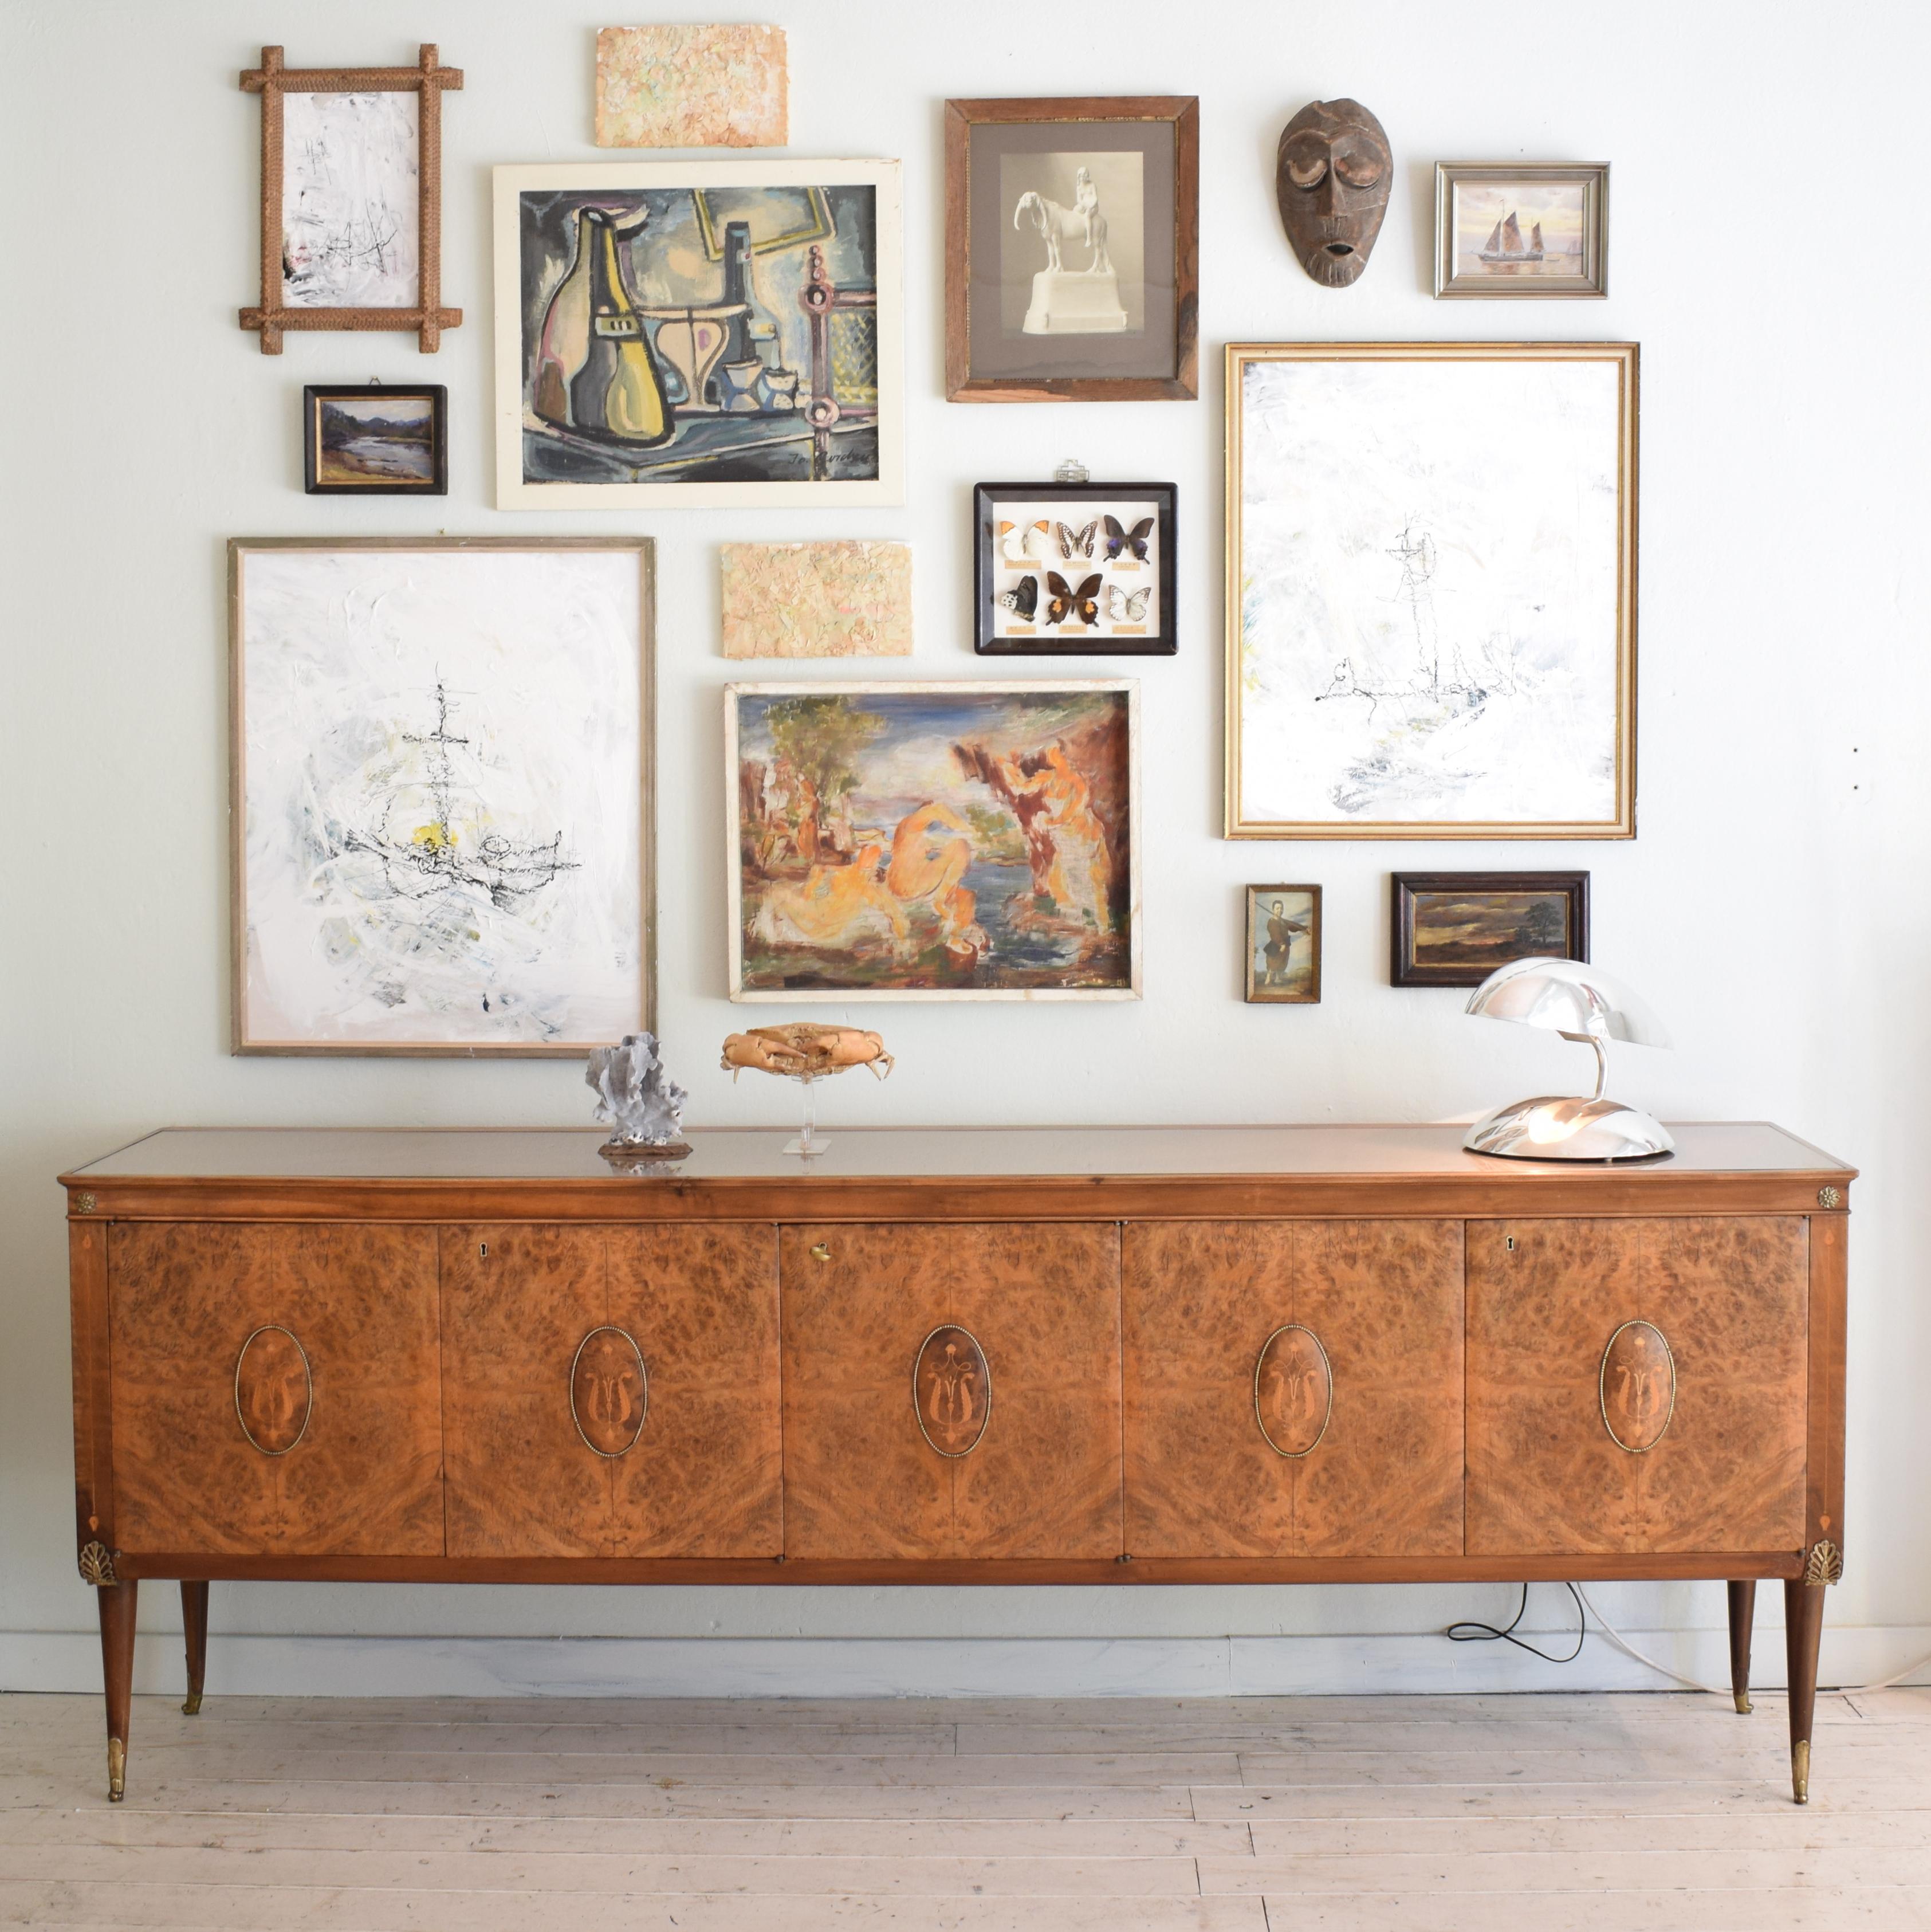 This elegant large midcentury Italian brown sideboard in the style of Paolo Buffa was made in the 1940s.
It is in walnut, burr walnut and has got some beautiful Marquetry details. Also the brass leg shoes are very special. The top of the sideboard